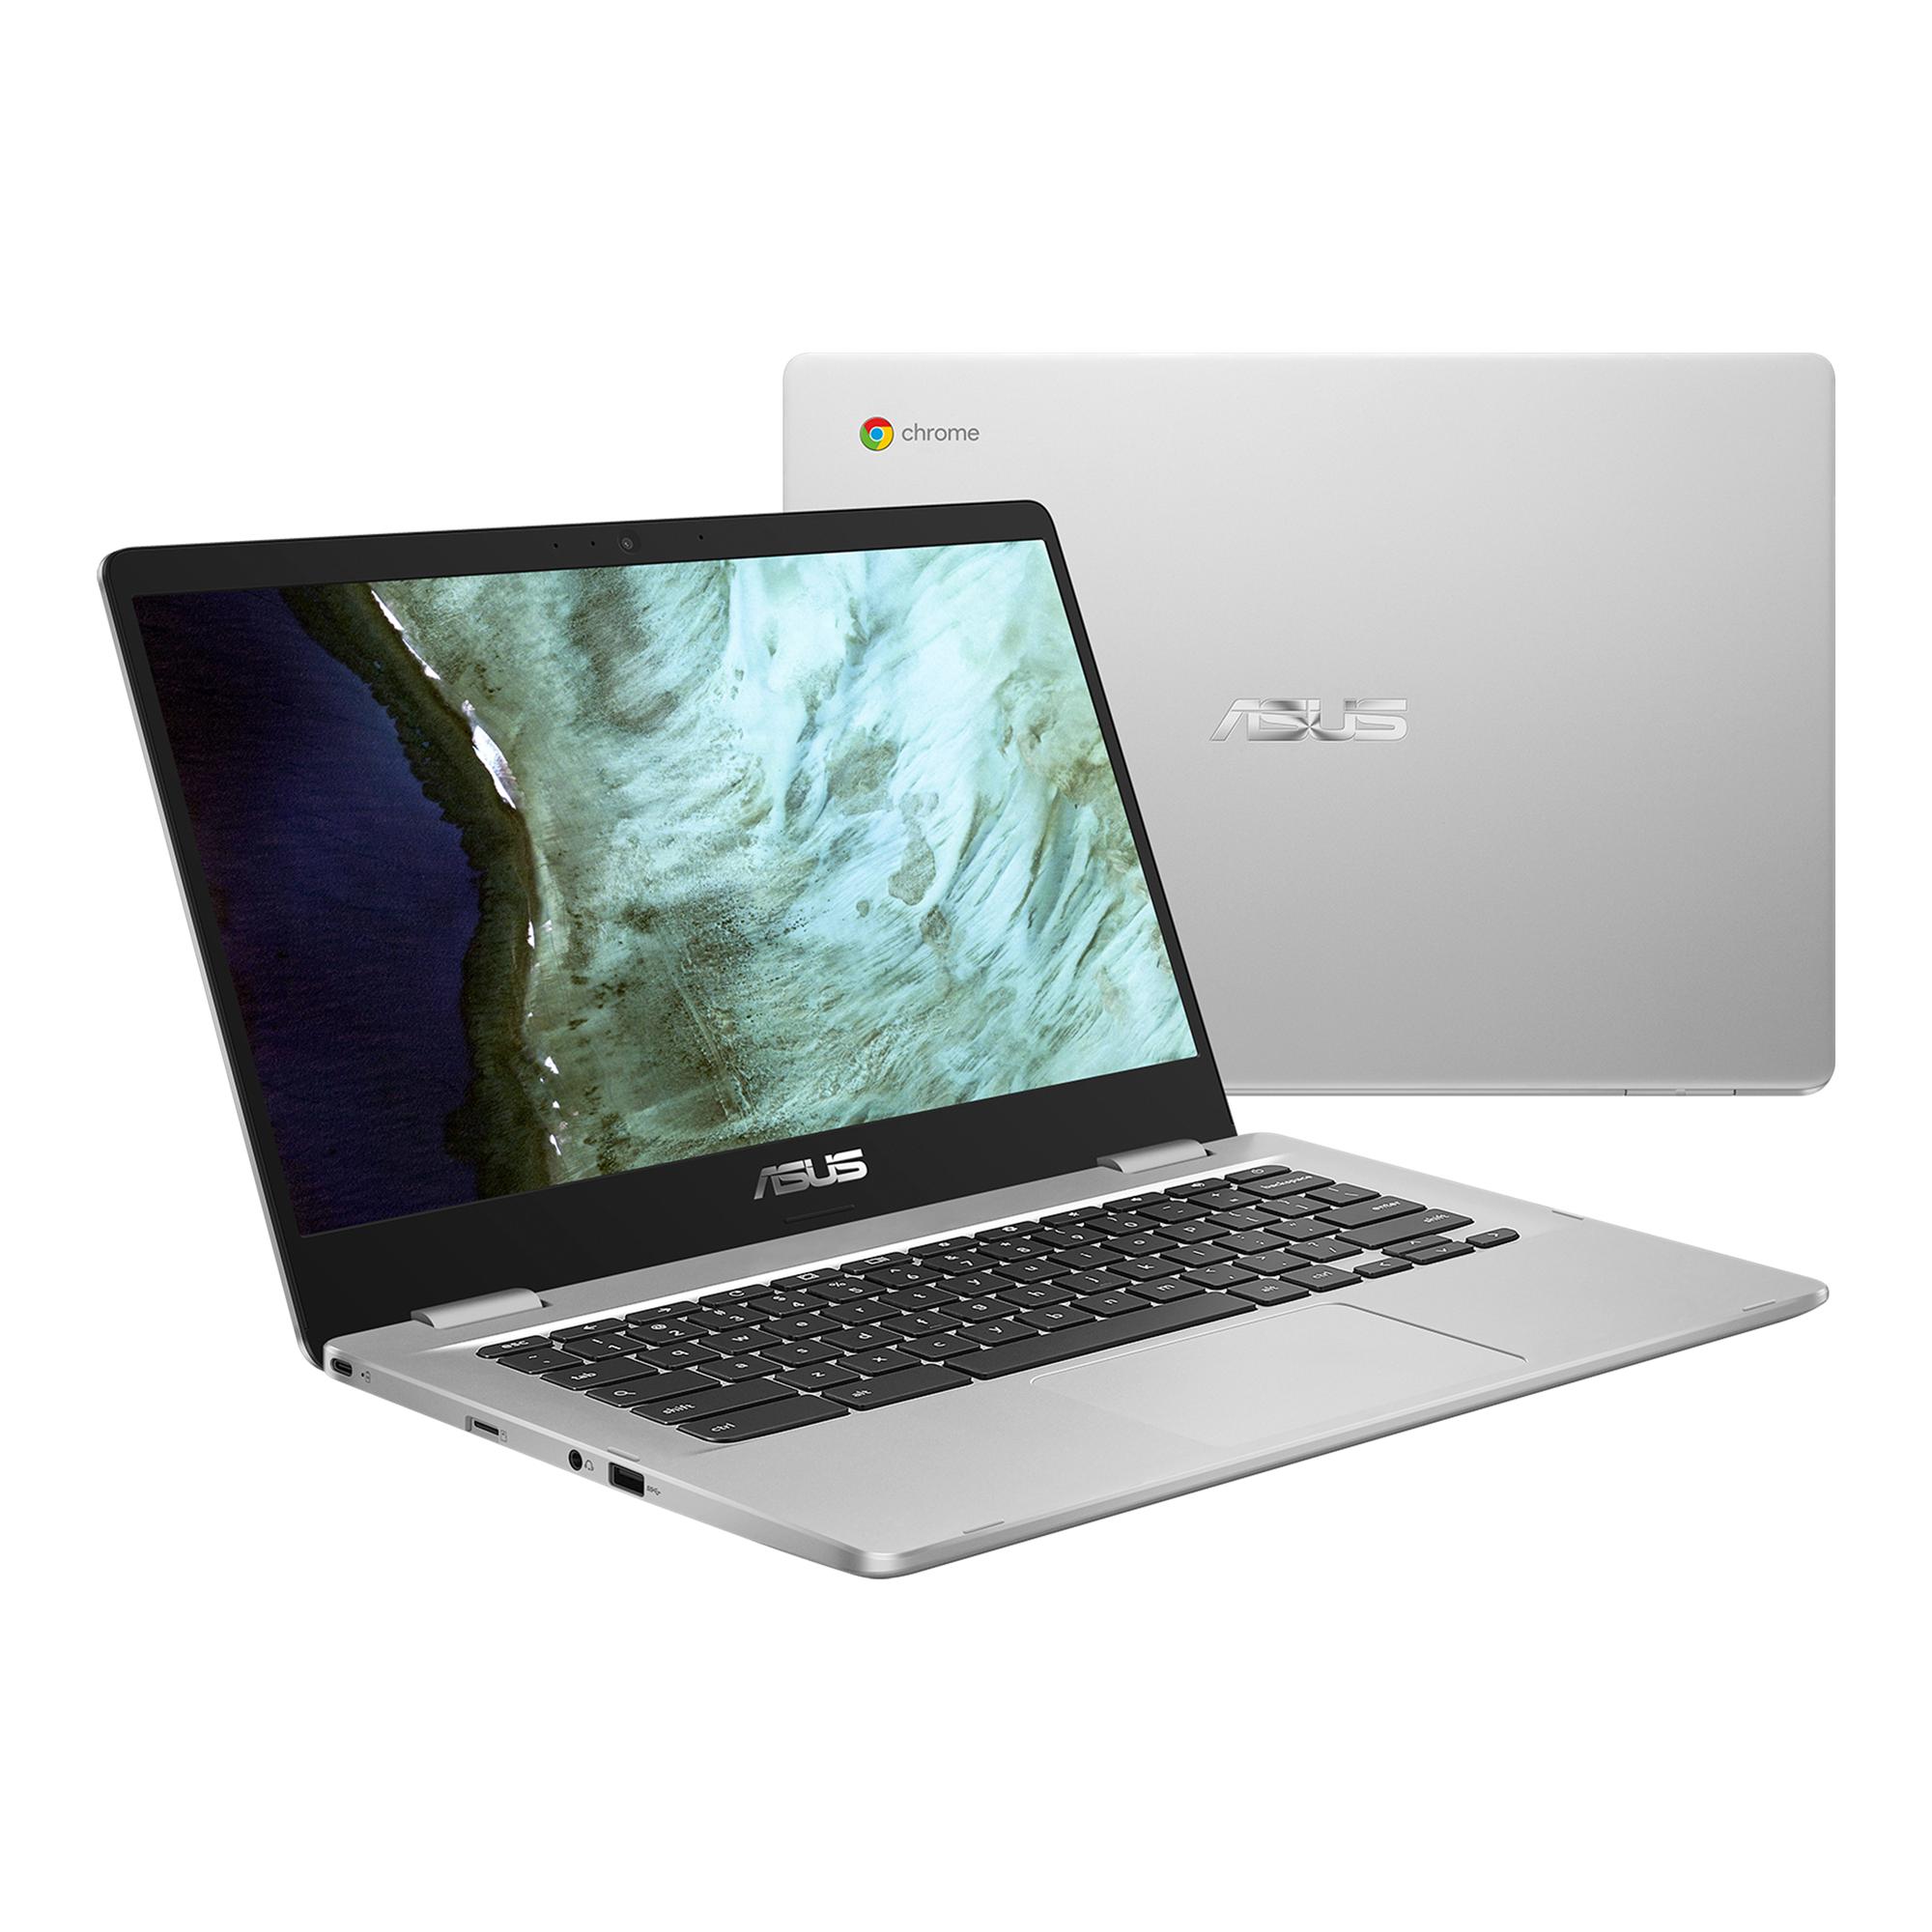 ASUS Chromebook C423｜Laptops For Work｜ASUS USA